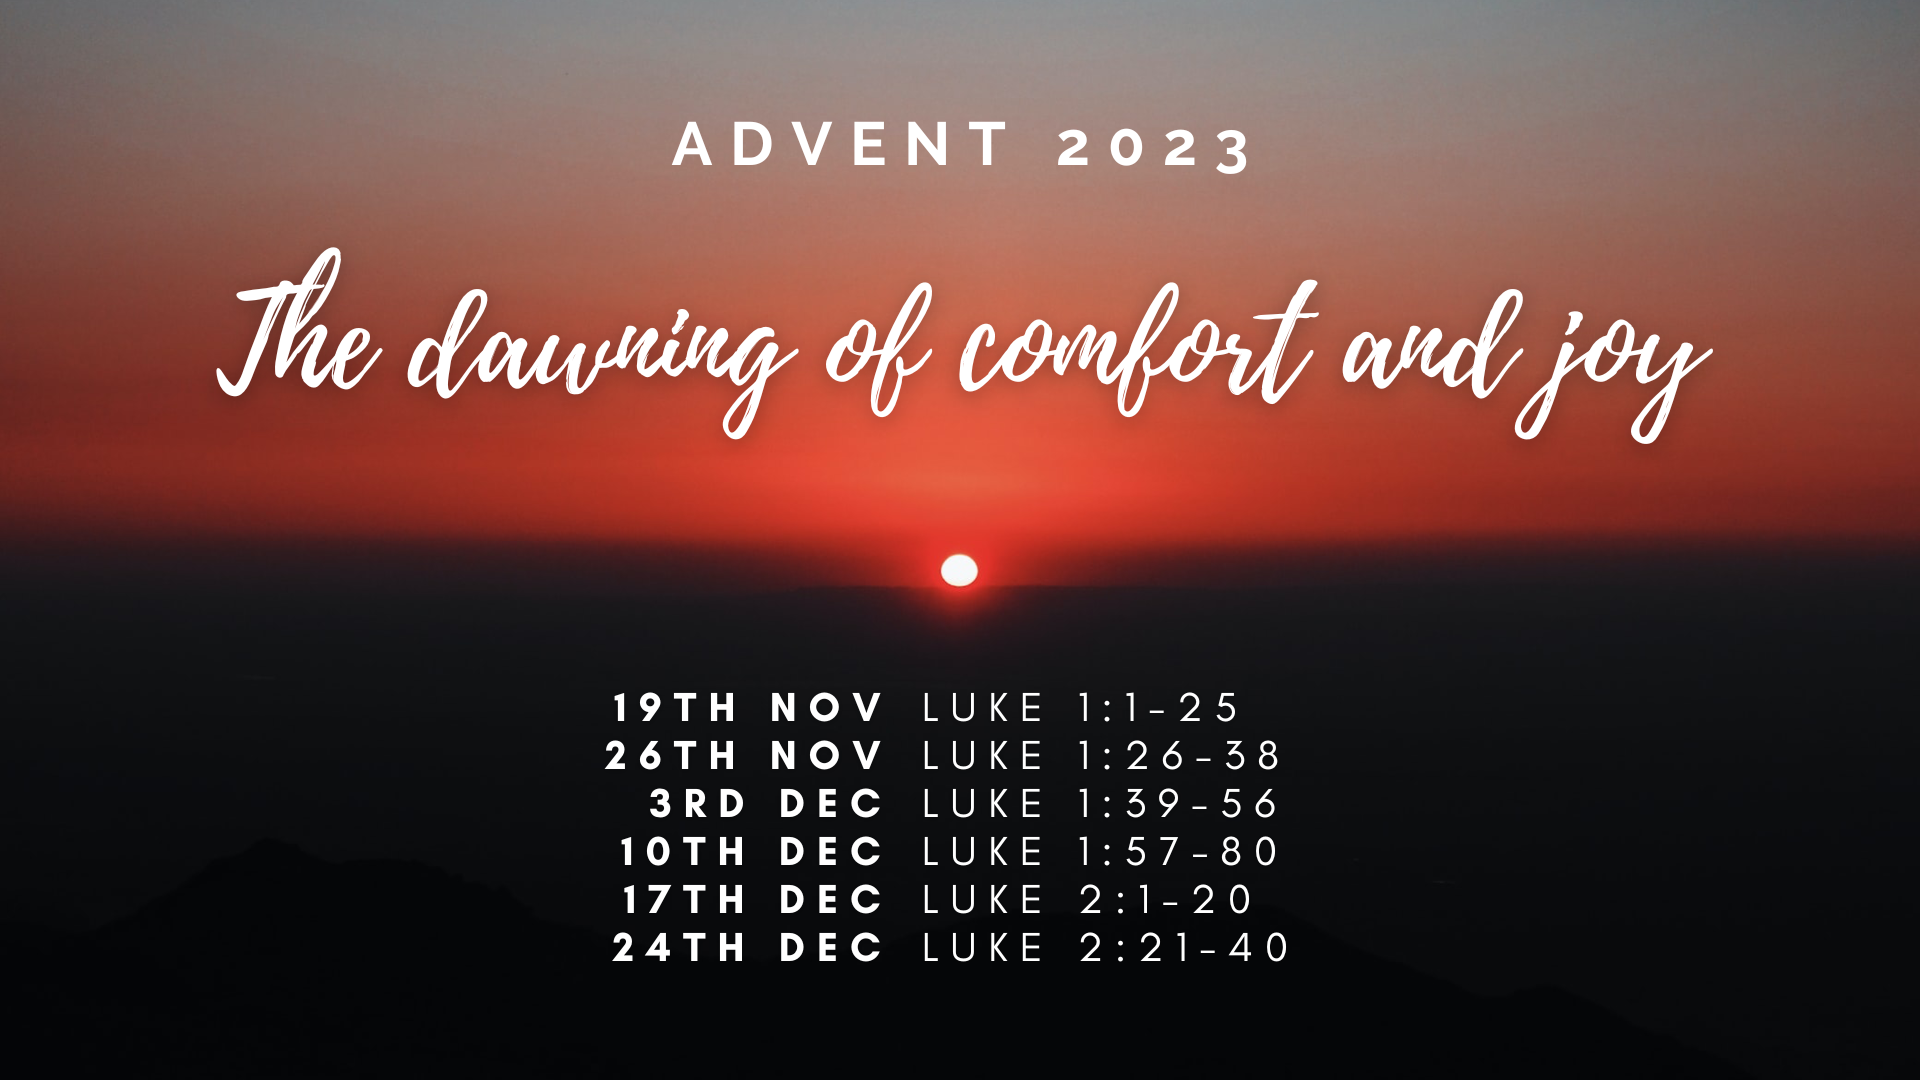 Advent 2023: The Dawning of Comfort and Joy